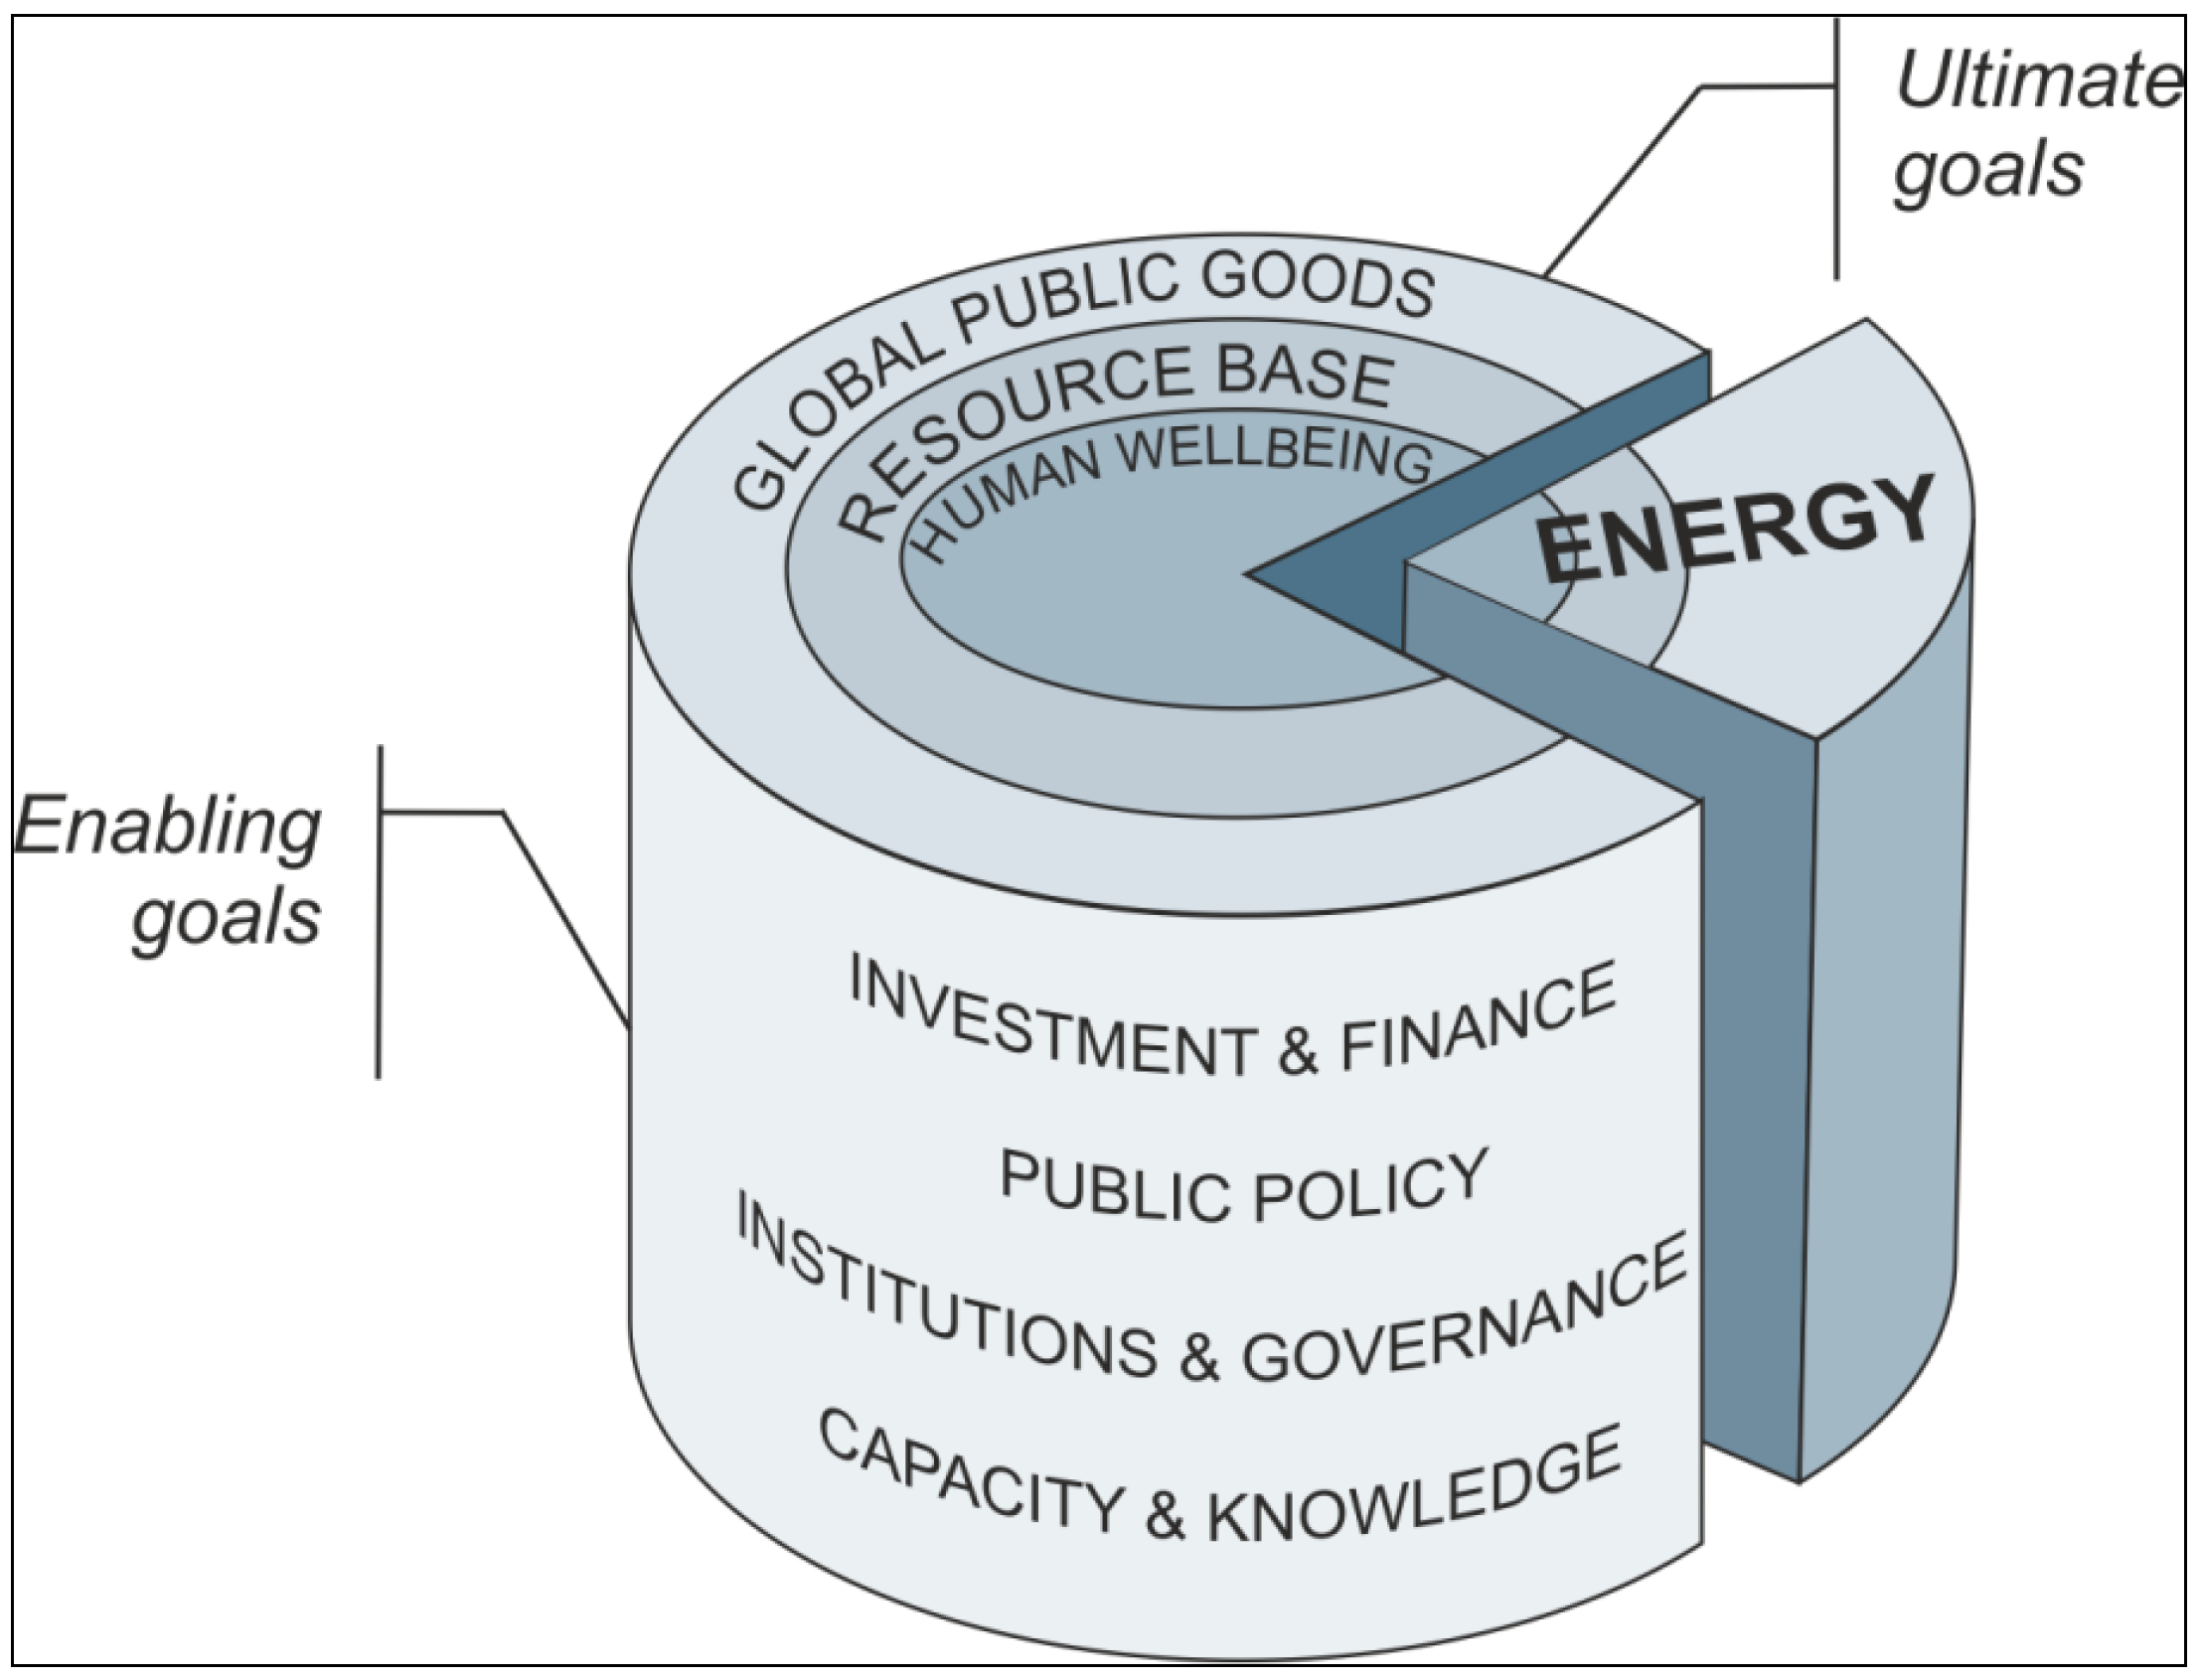 What Are Global Public Goods?